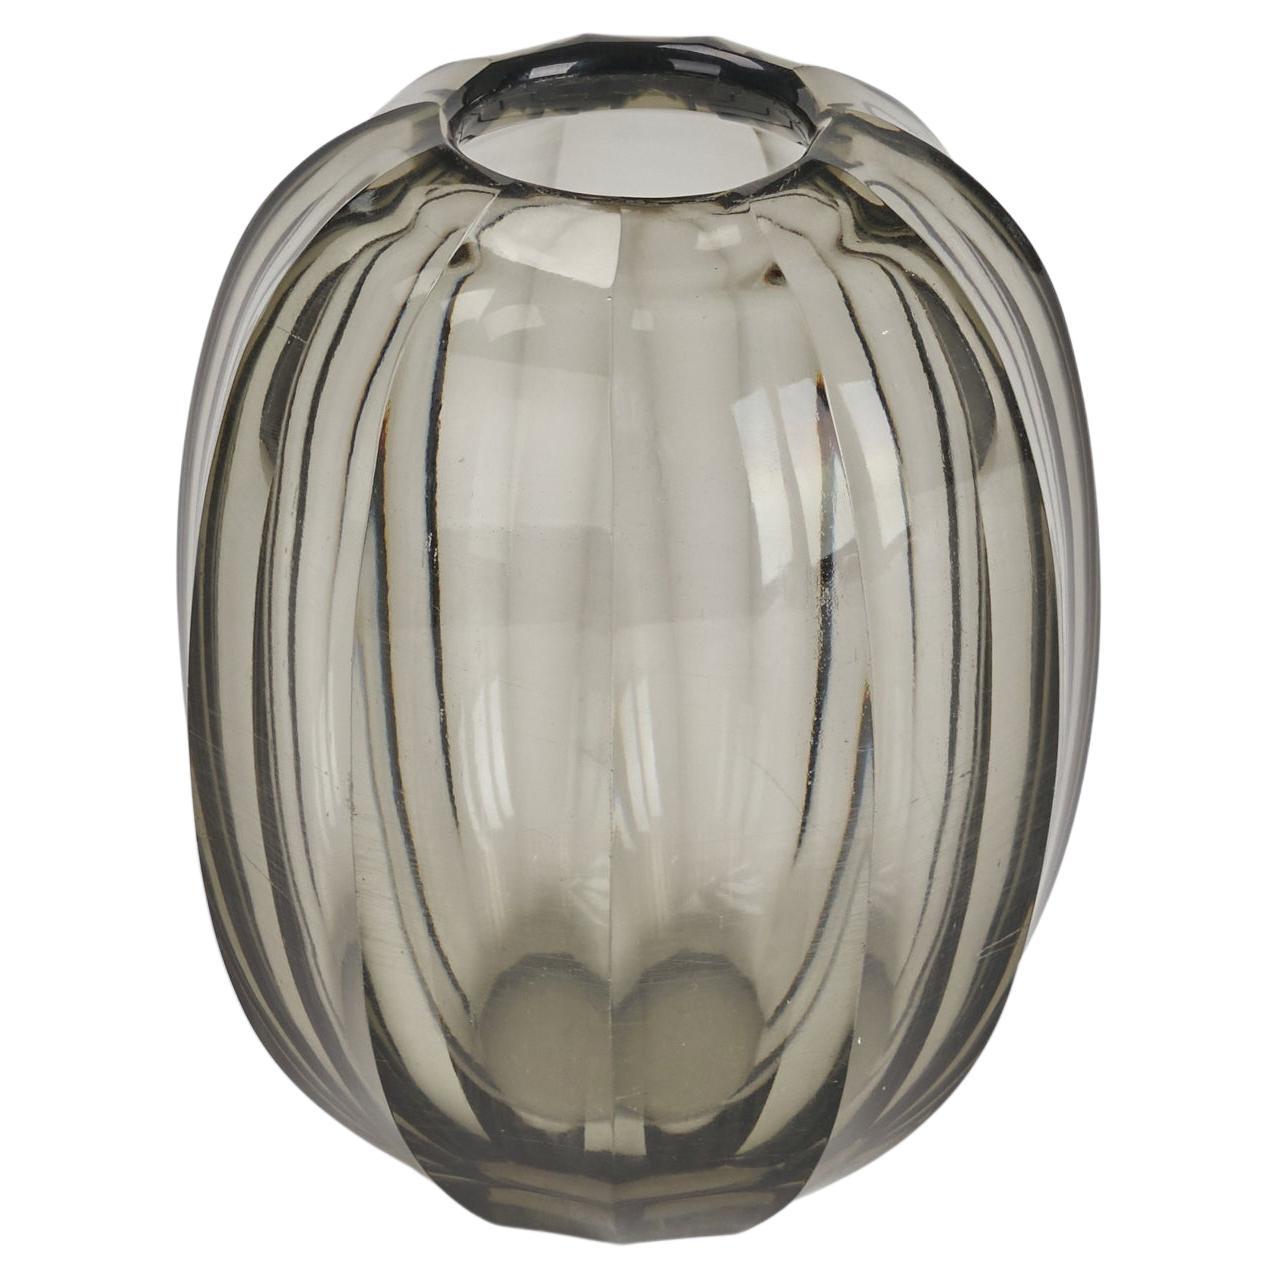 Simon Gate, Vase, Smoked Glass, Sweden, 1940s For Sale